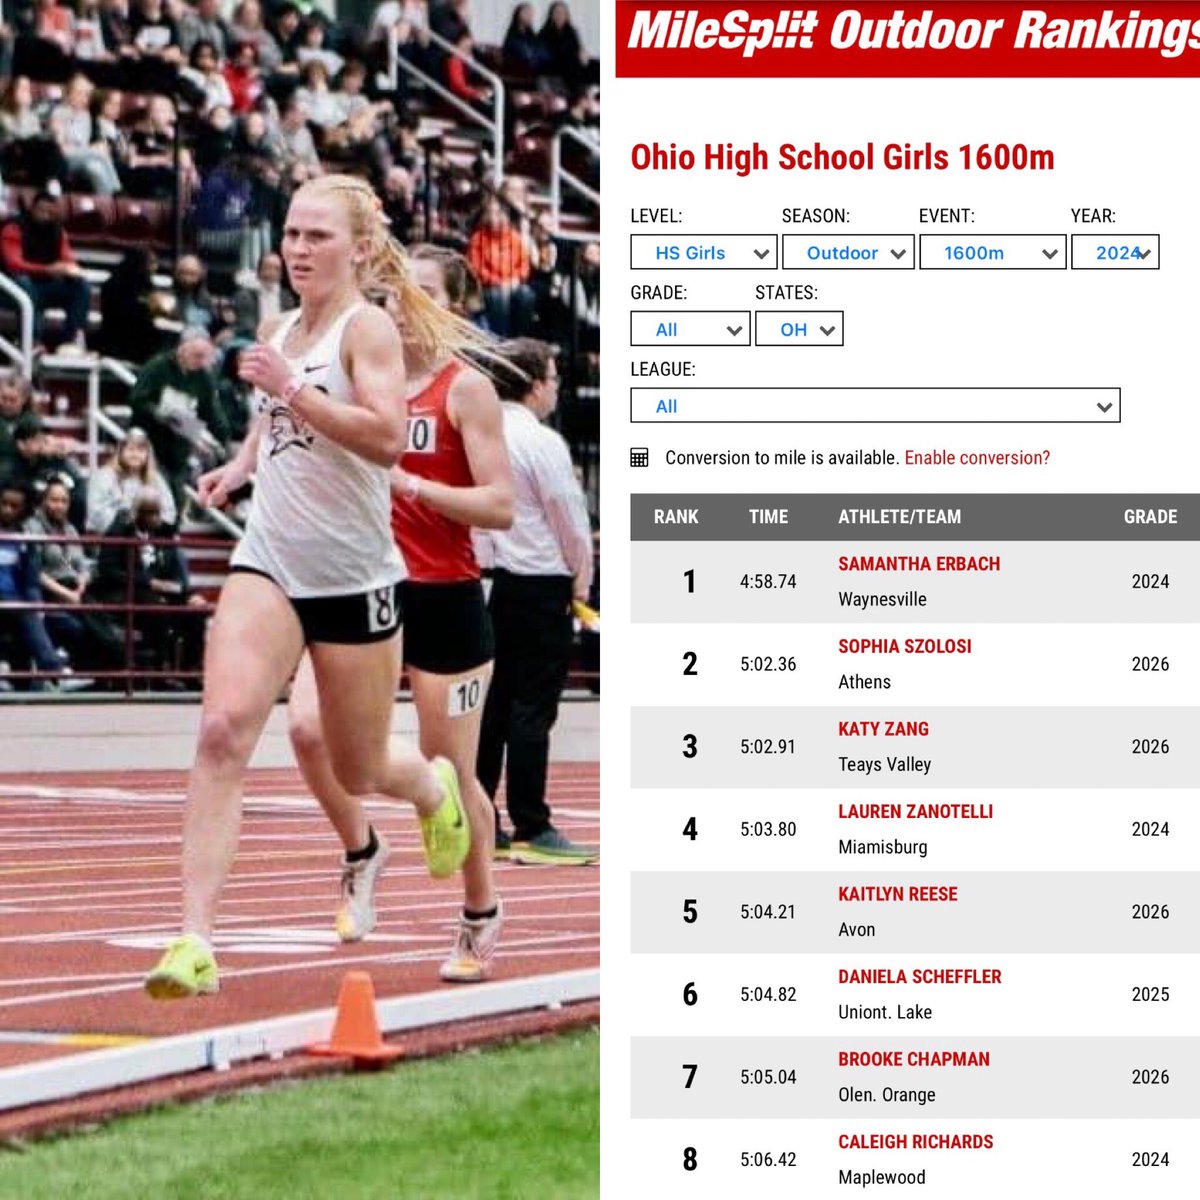 Pretty proud of this kid. #1 in the state and the only sub 5 minute result so far this year. Not bad for a full time soccer player! @ErbachSamantha